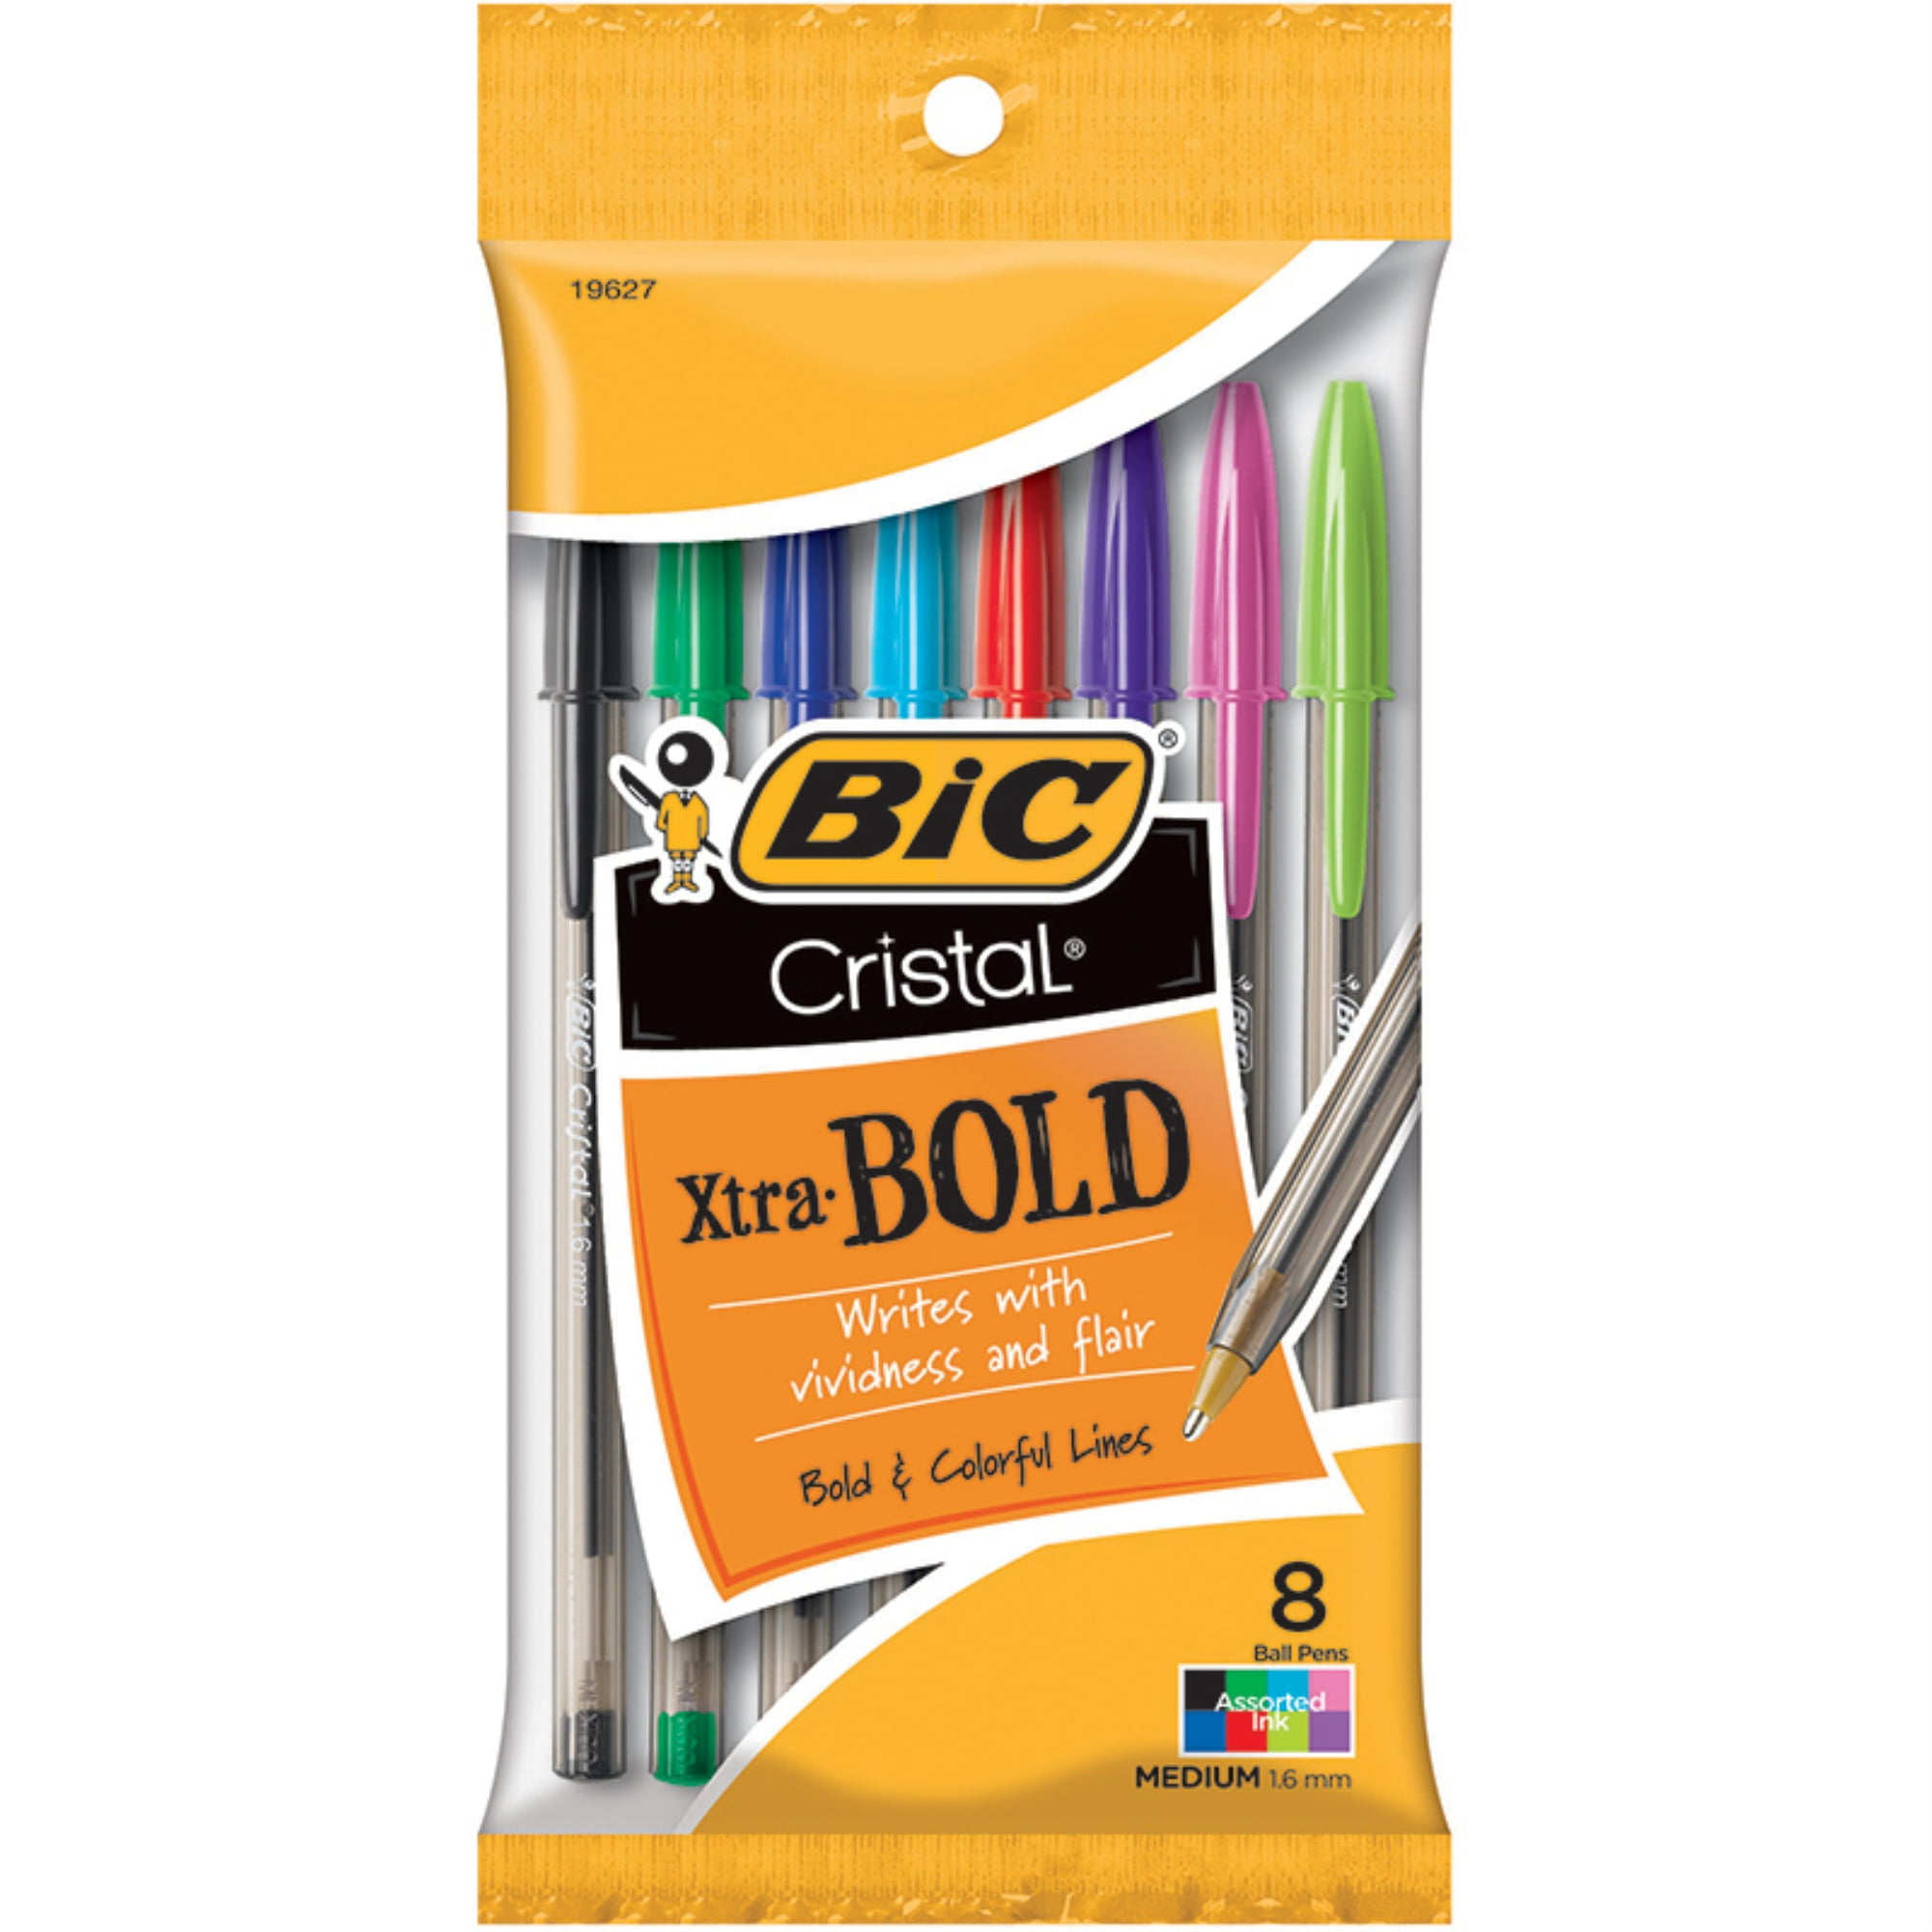 BIC Cristal Xtra Bold Ballpoint Pen Bold Point 1.6mm Black 24 Count 